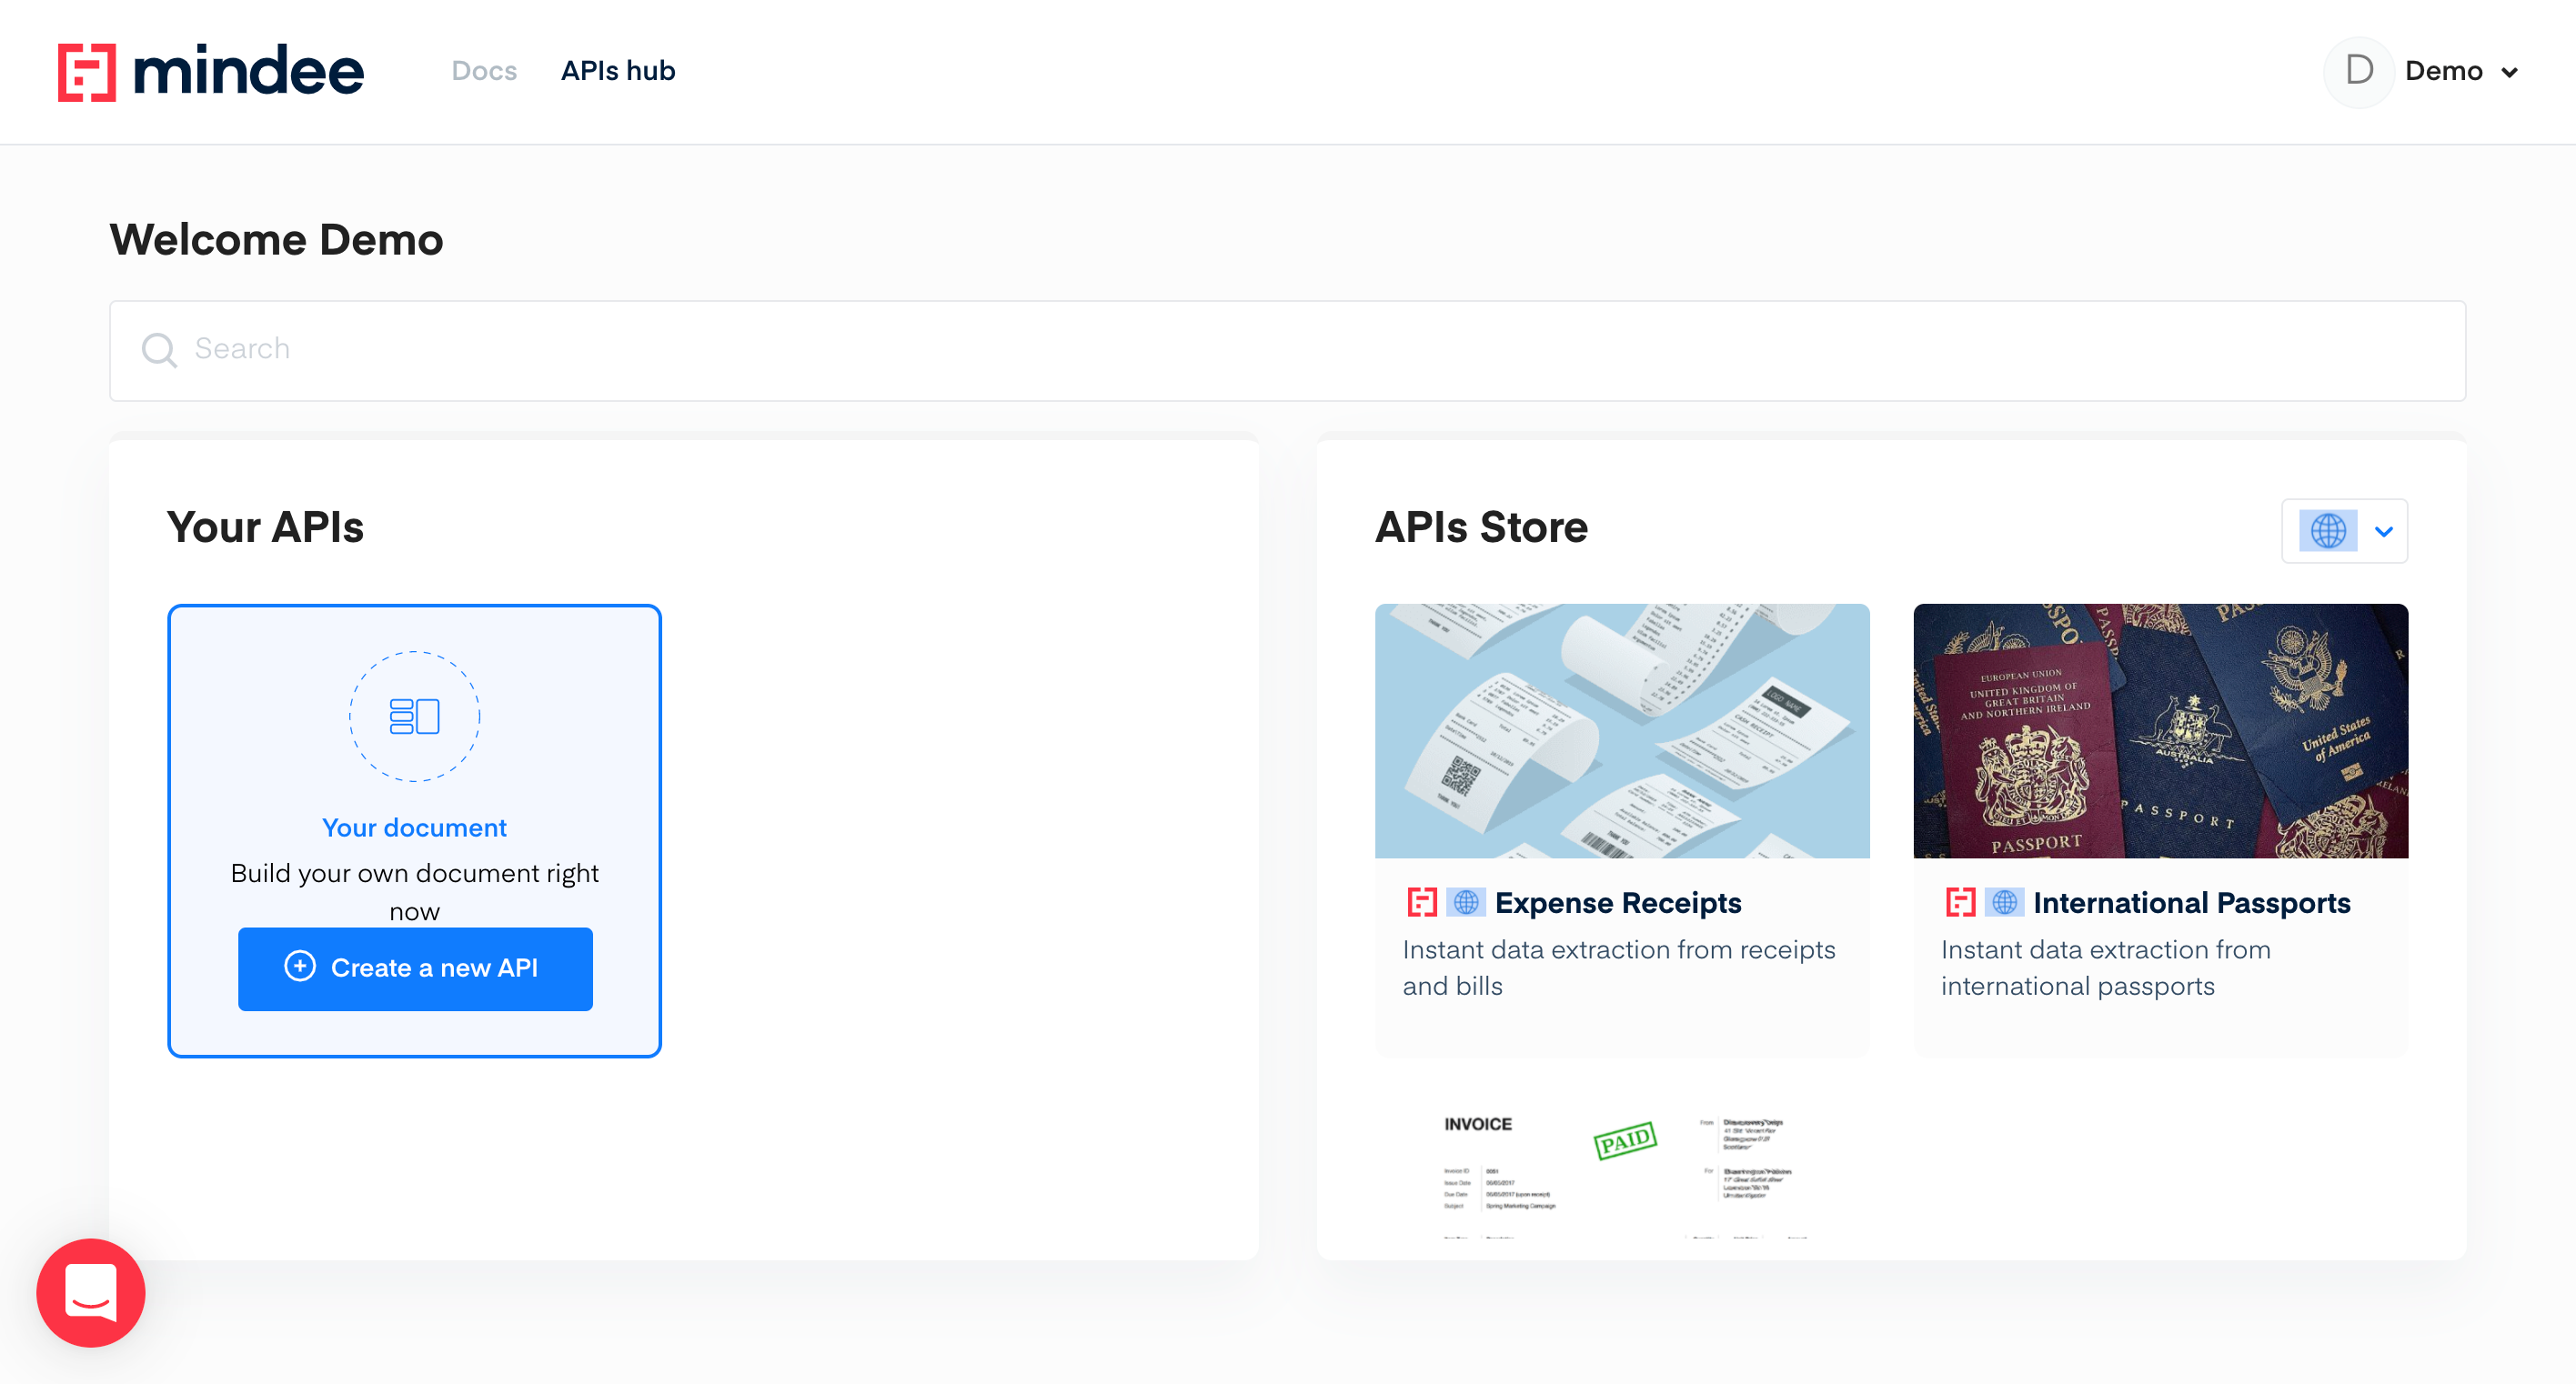 APIs hub page with Your APIs section on the left and API store section on the right